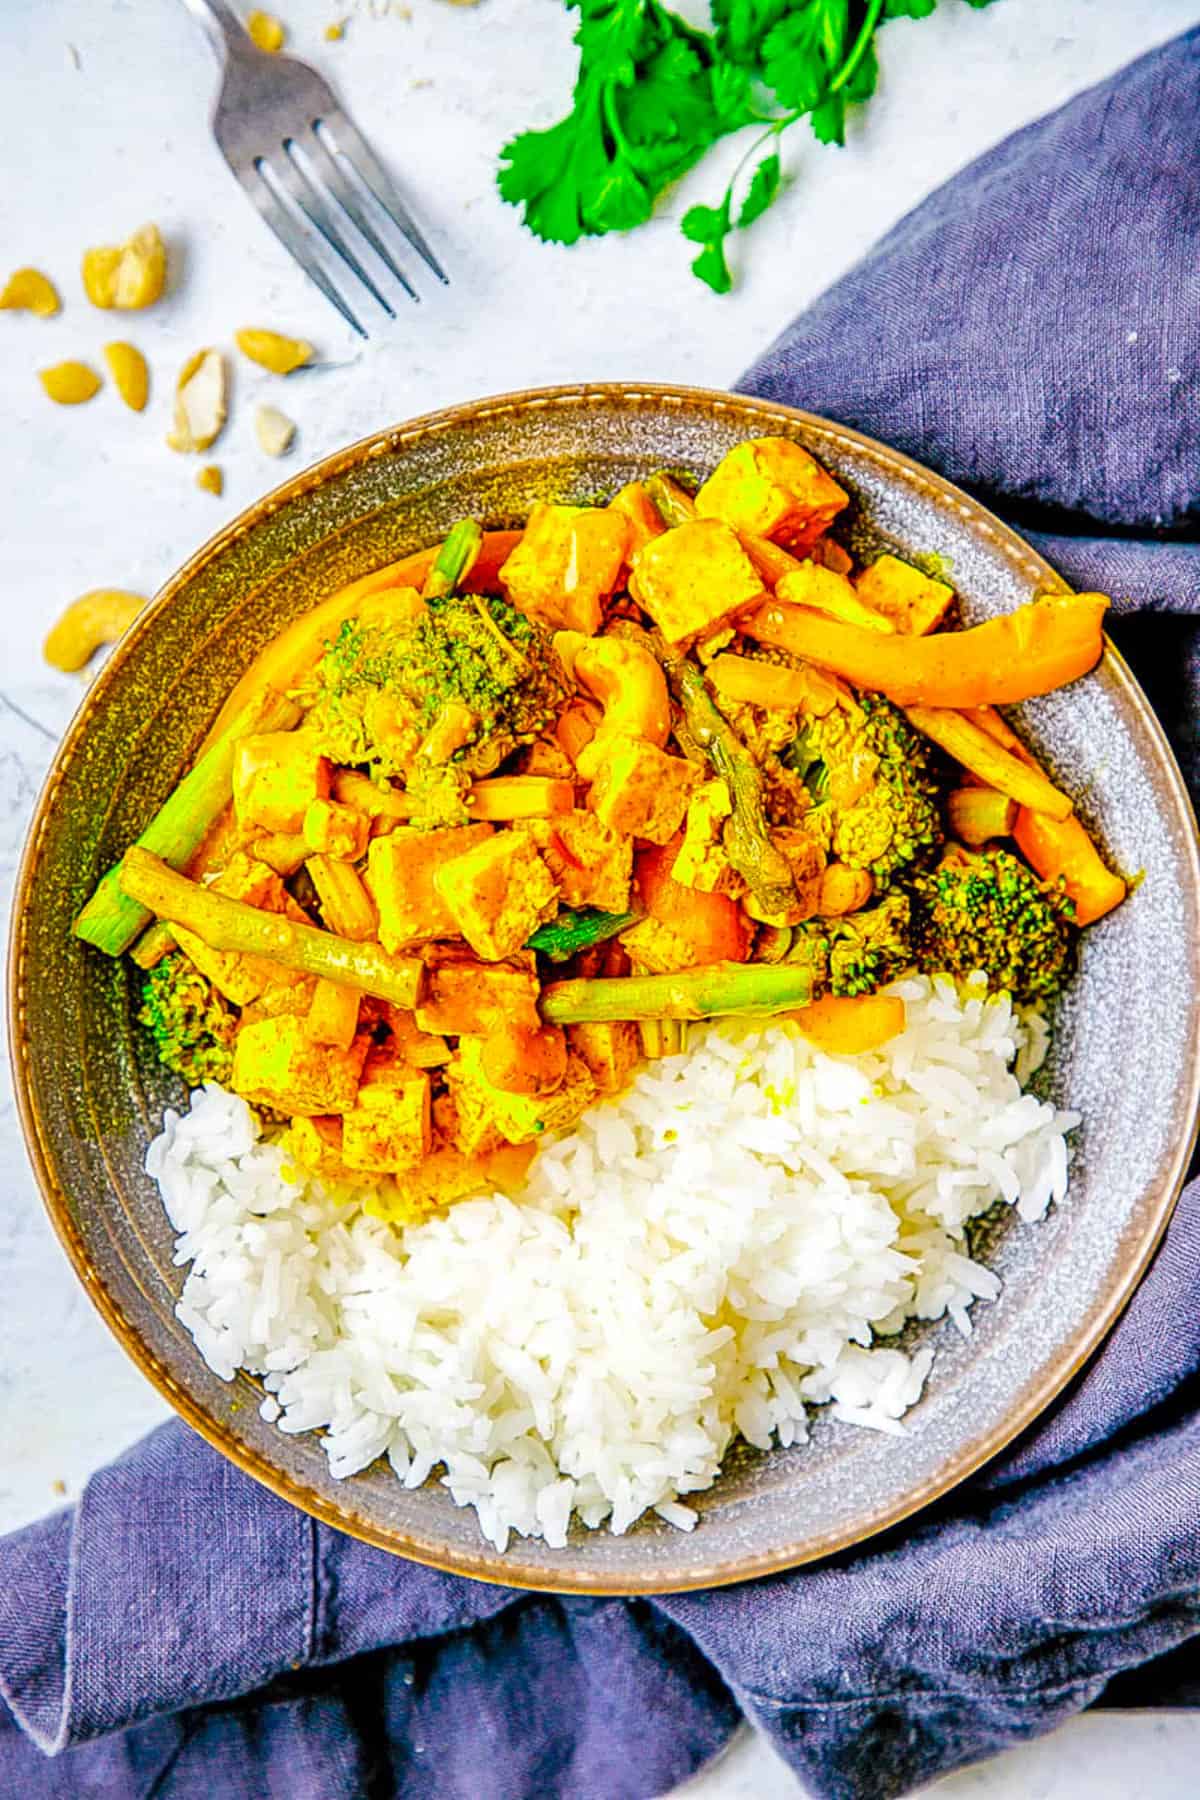 Thai tofu yellow curry with broccoli, potatoes, asparagus and peppers served in a grey bowl.